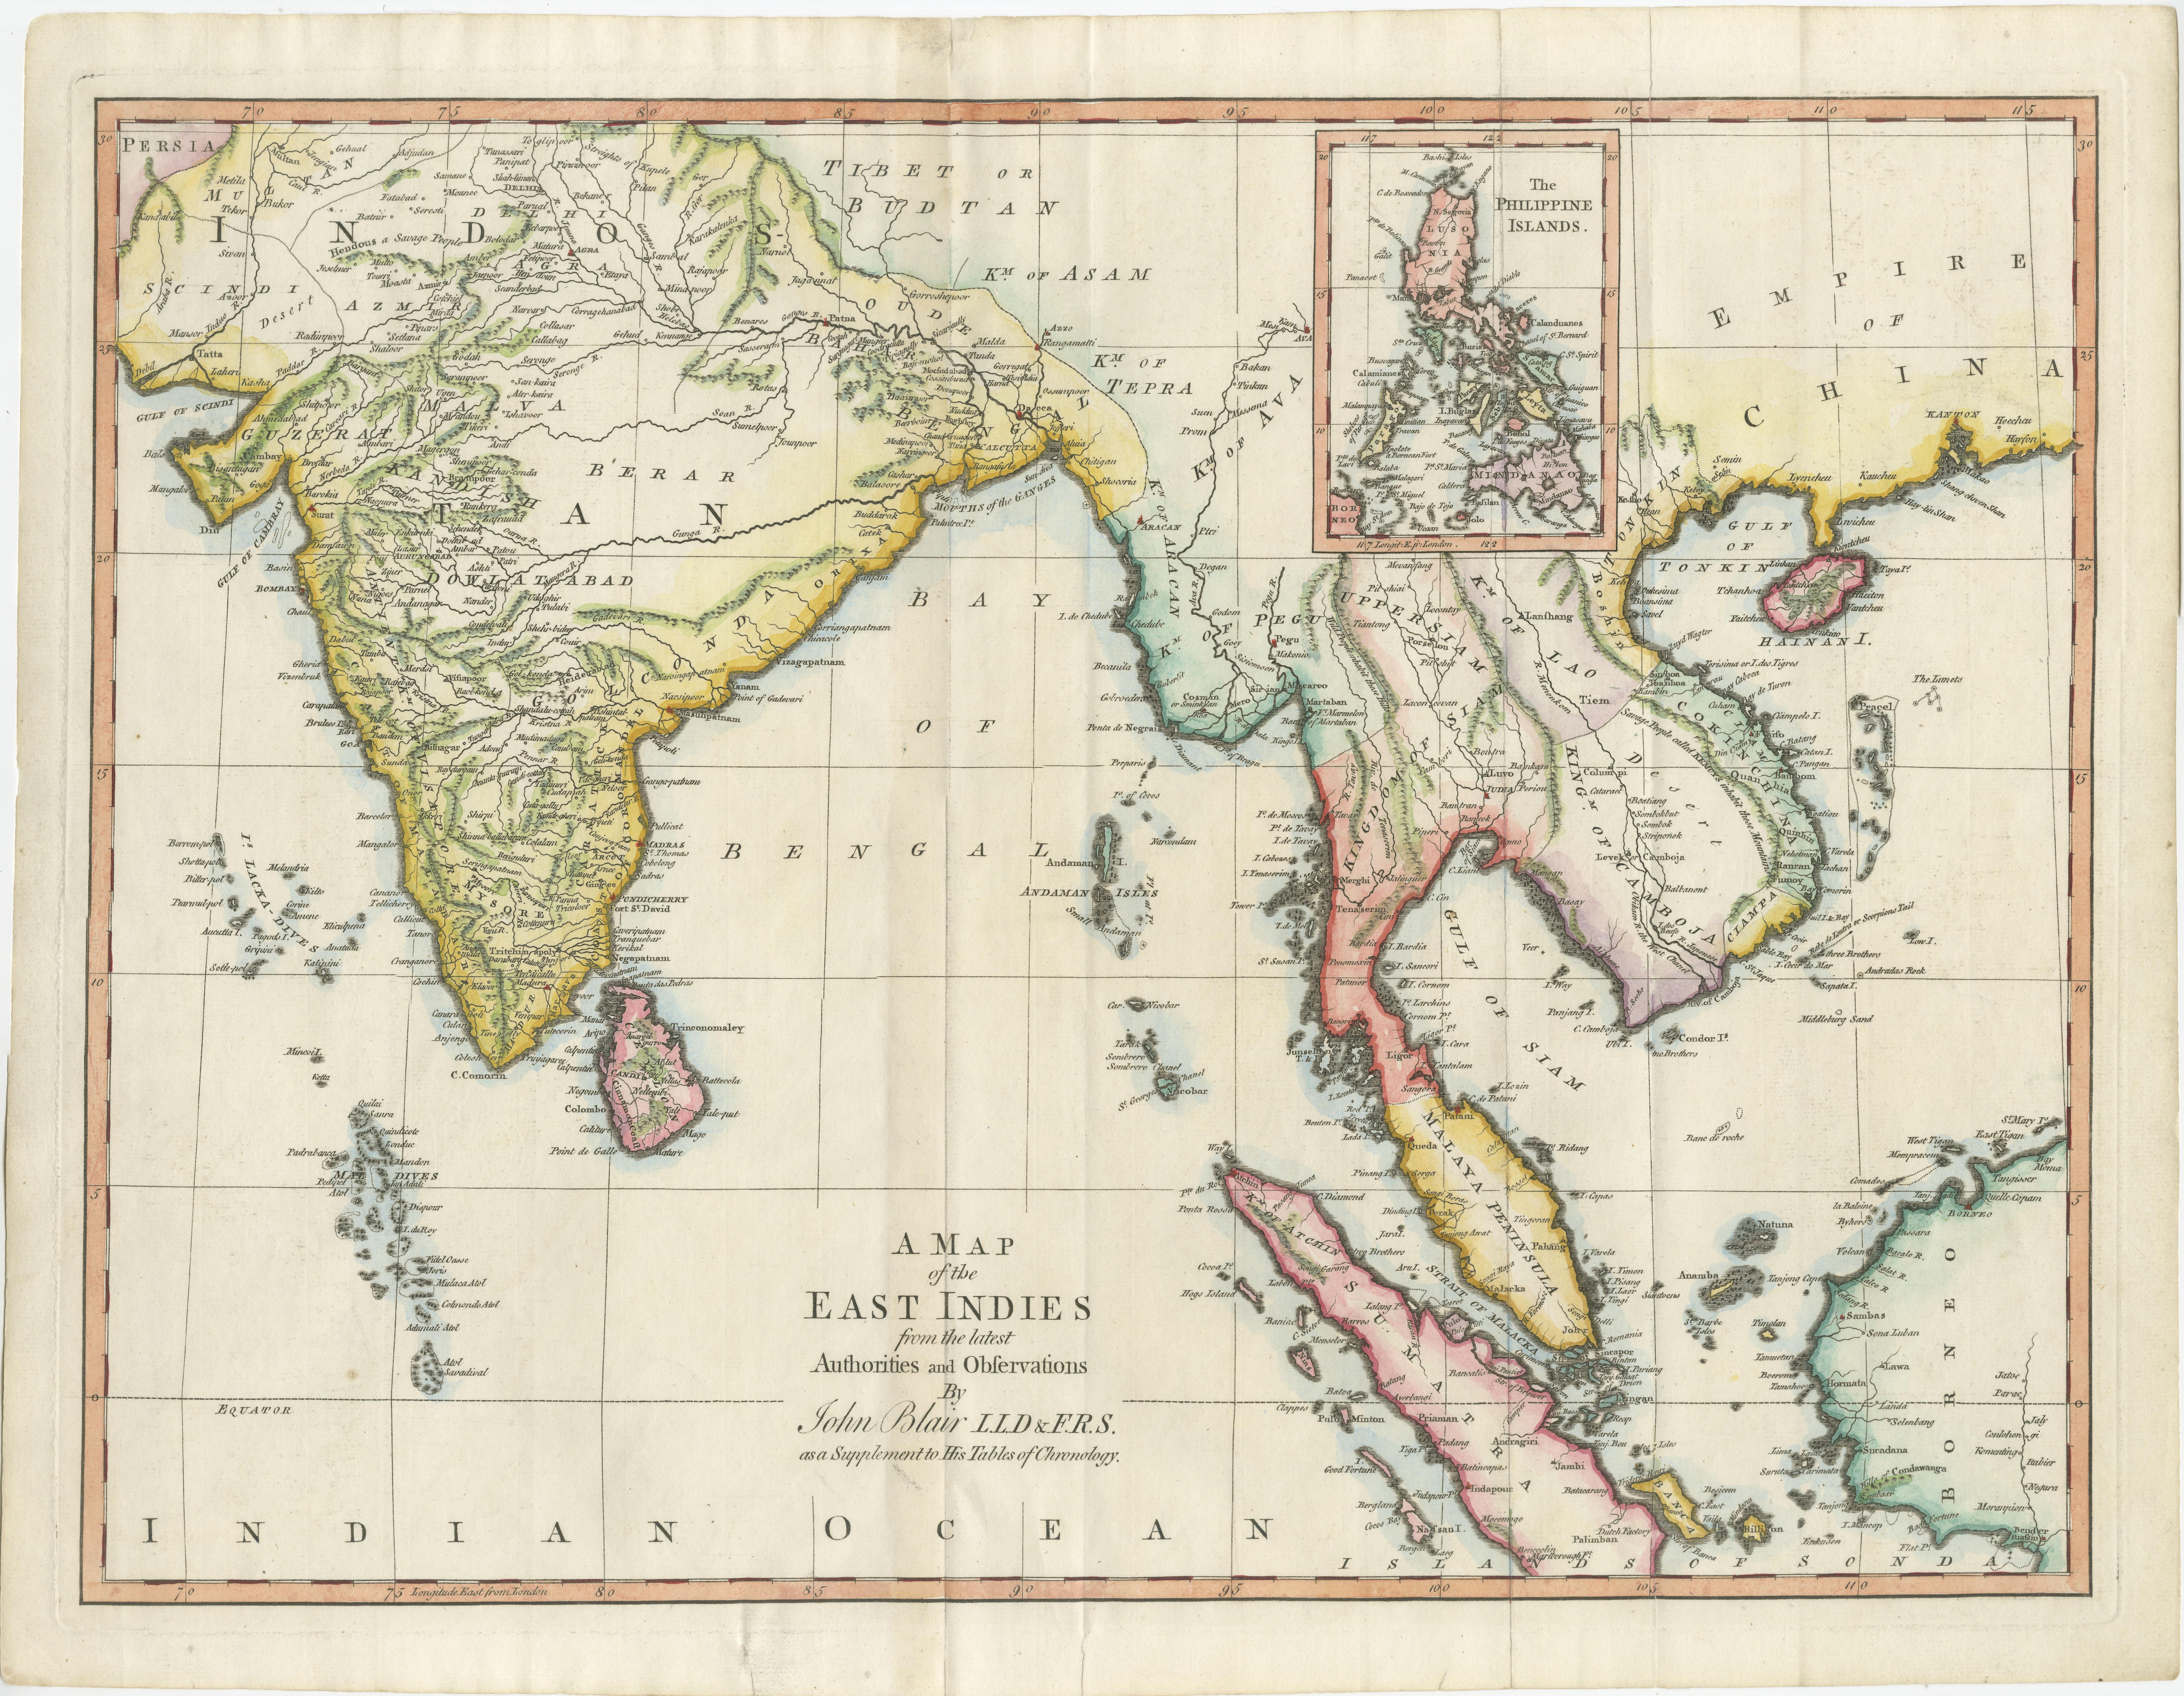 Antique map titled 'A Map of the East Indies (..)'. Large antique map of Southeast Asia, India, and part of China, extending to Tibet, the Maladives, Sumatra, part of Borneo, Hainan, Kanton, etc. Large inset of the Philippines. Engraved by T.